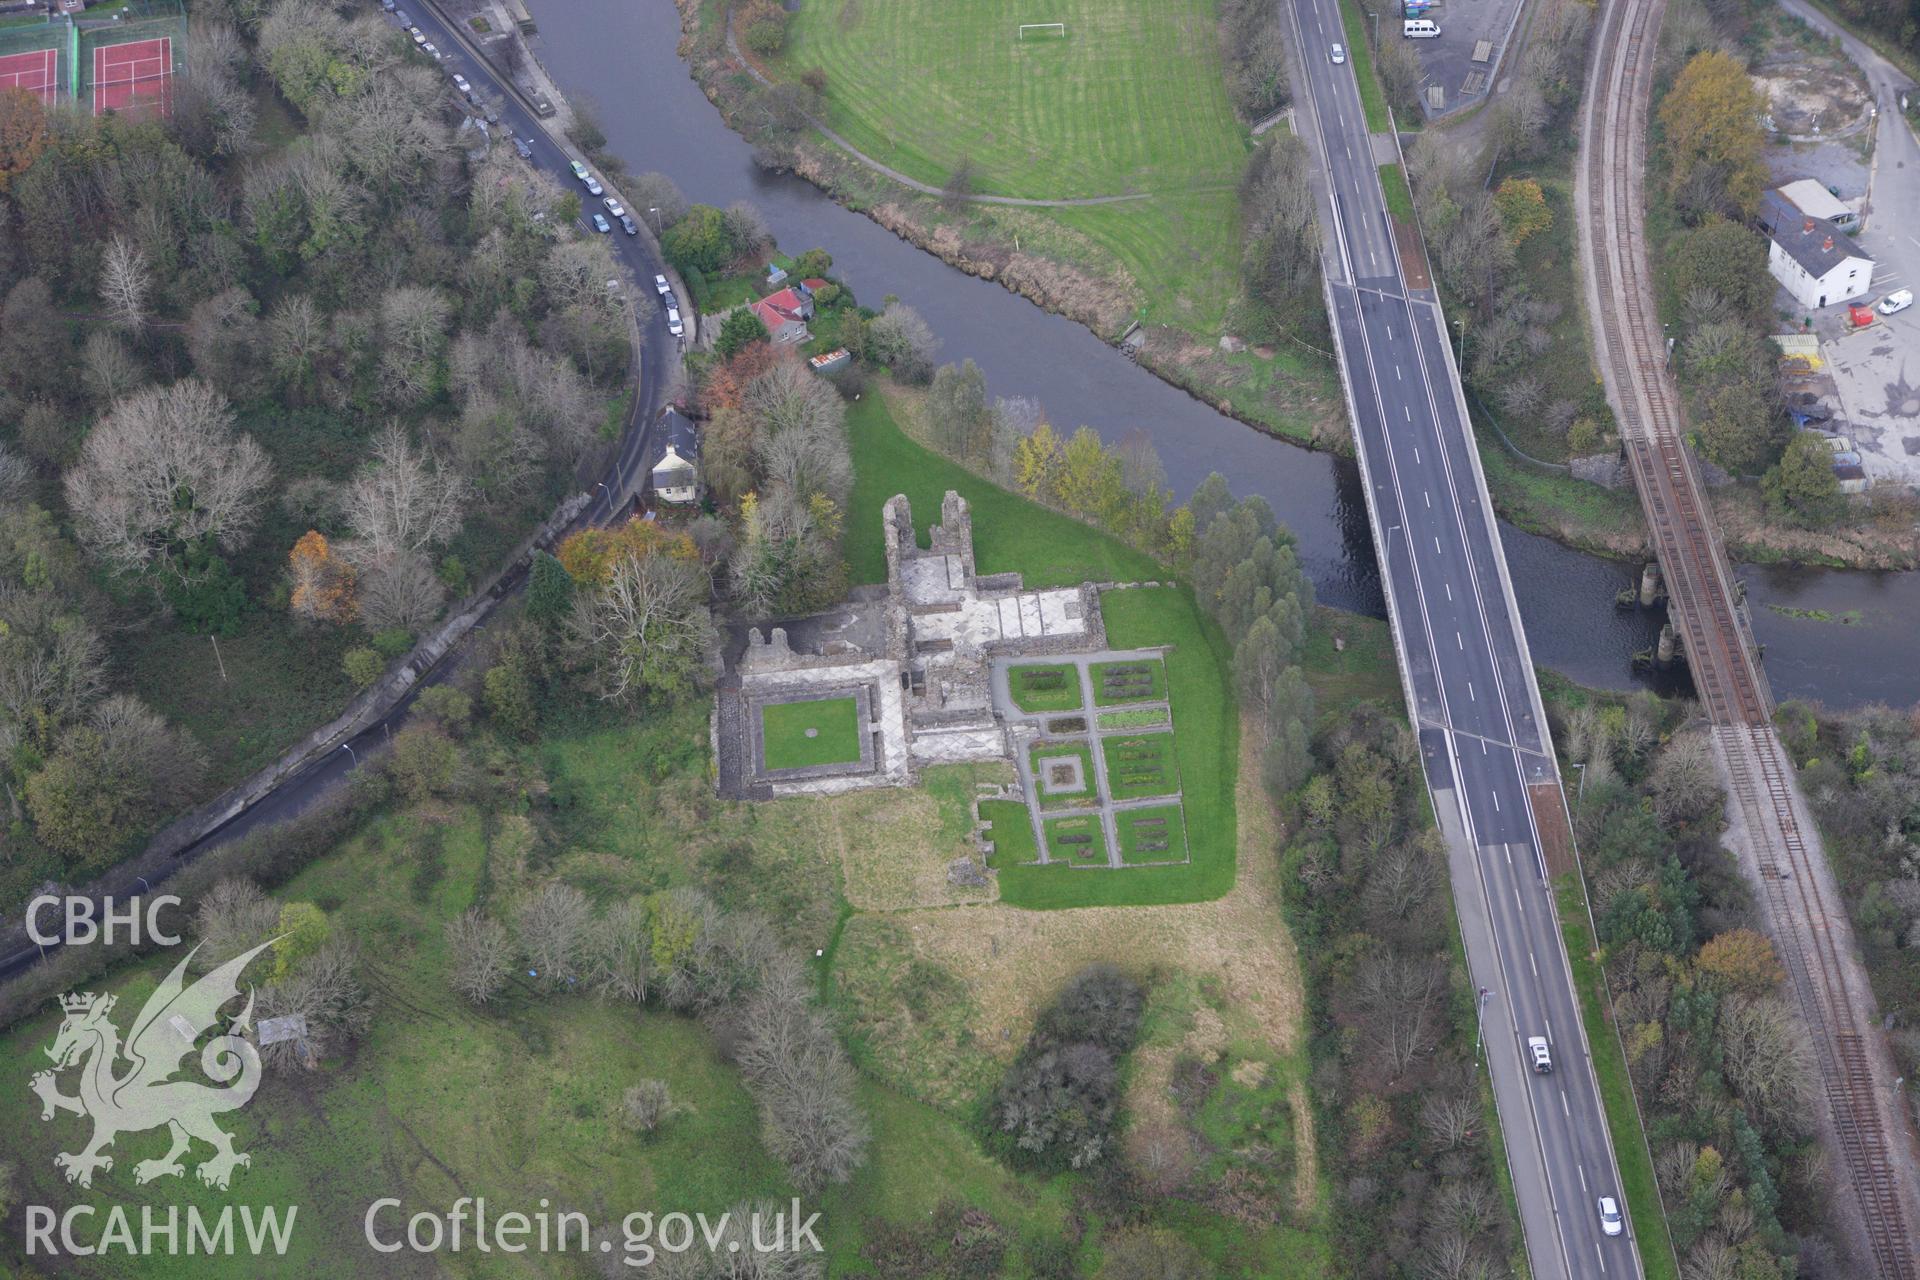 RCAHMW colour oblique aerial photograph of Priory of St Mary and St Thomas The Martyr, Haverfordwest. Taken on 09 November 2009 by Toby Driver